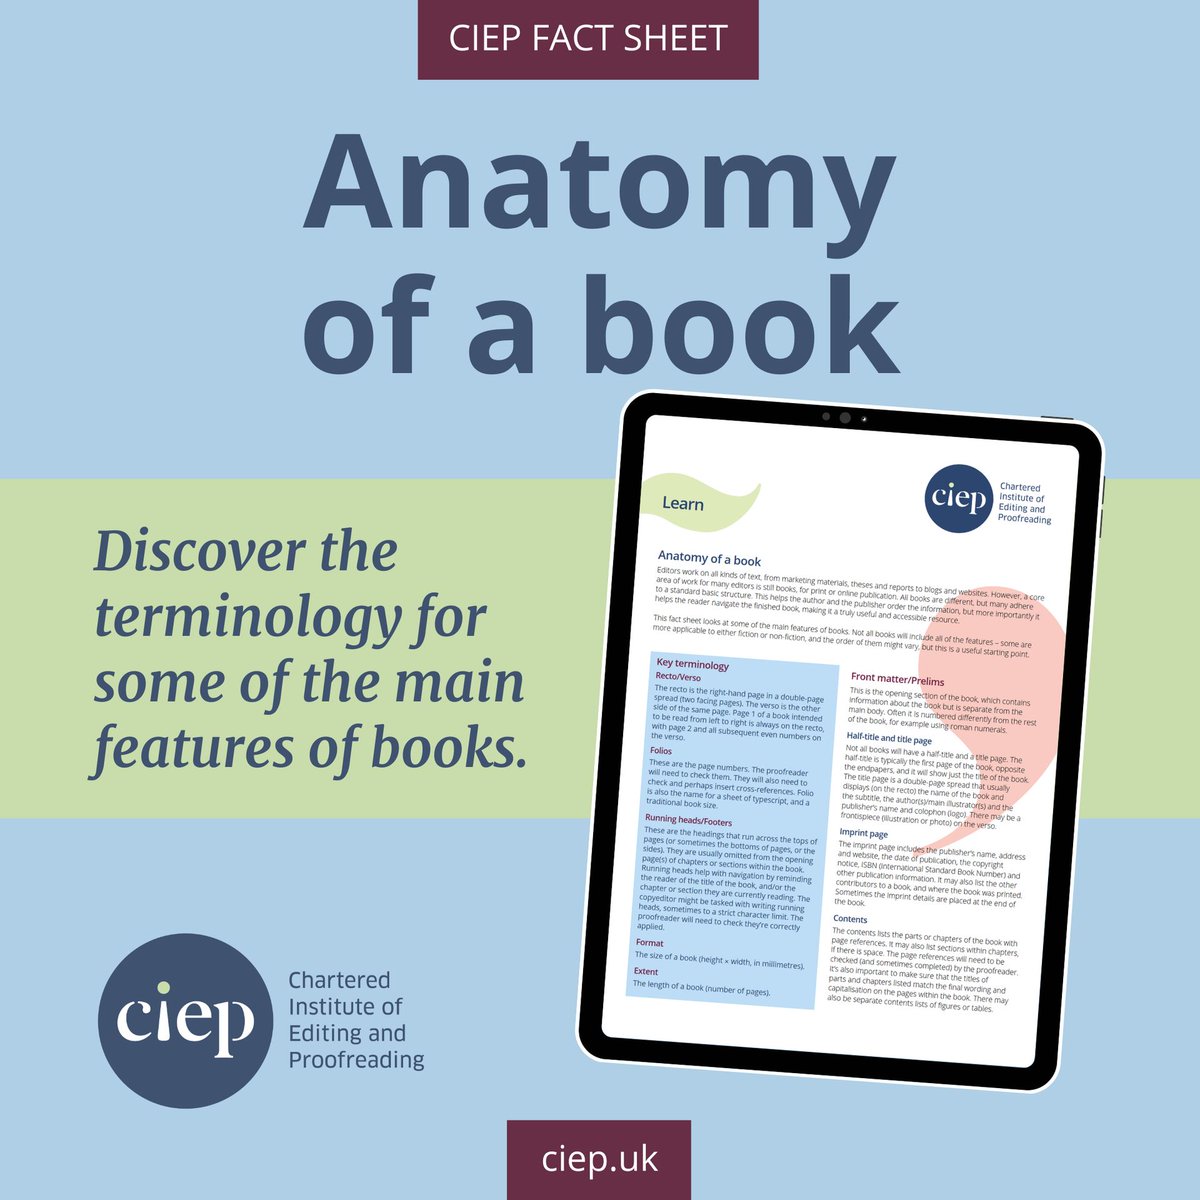 Want to find out about a book's structure? This fact sheet looks at the terminology for some of the main features of books and the order in which they appear. Only £1.50! Free for members. Get your copy here. 👉 ciep.uk/resources/fact…